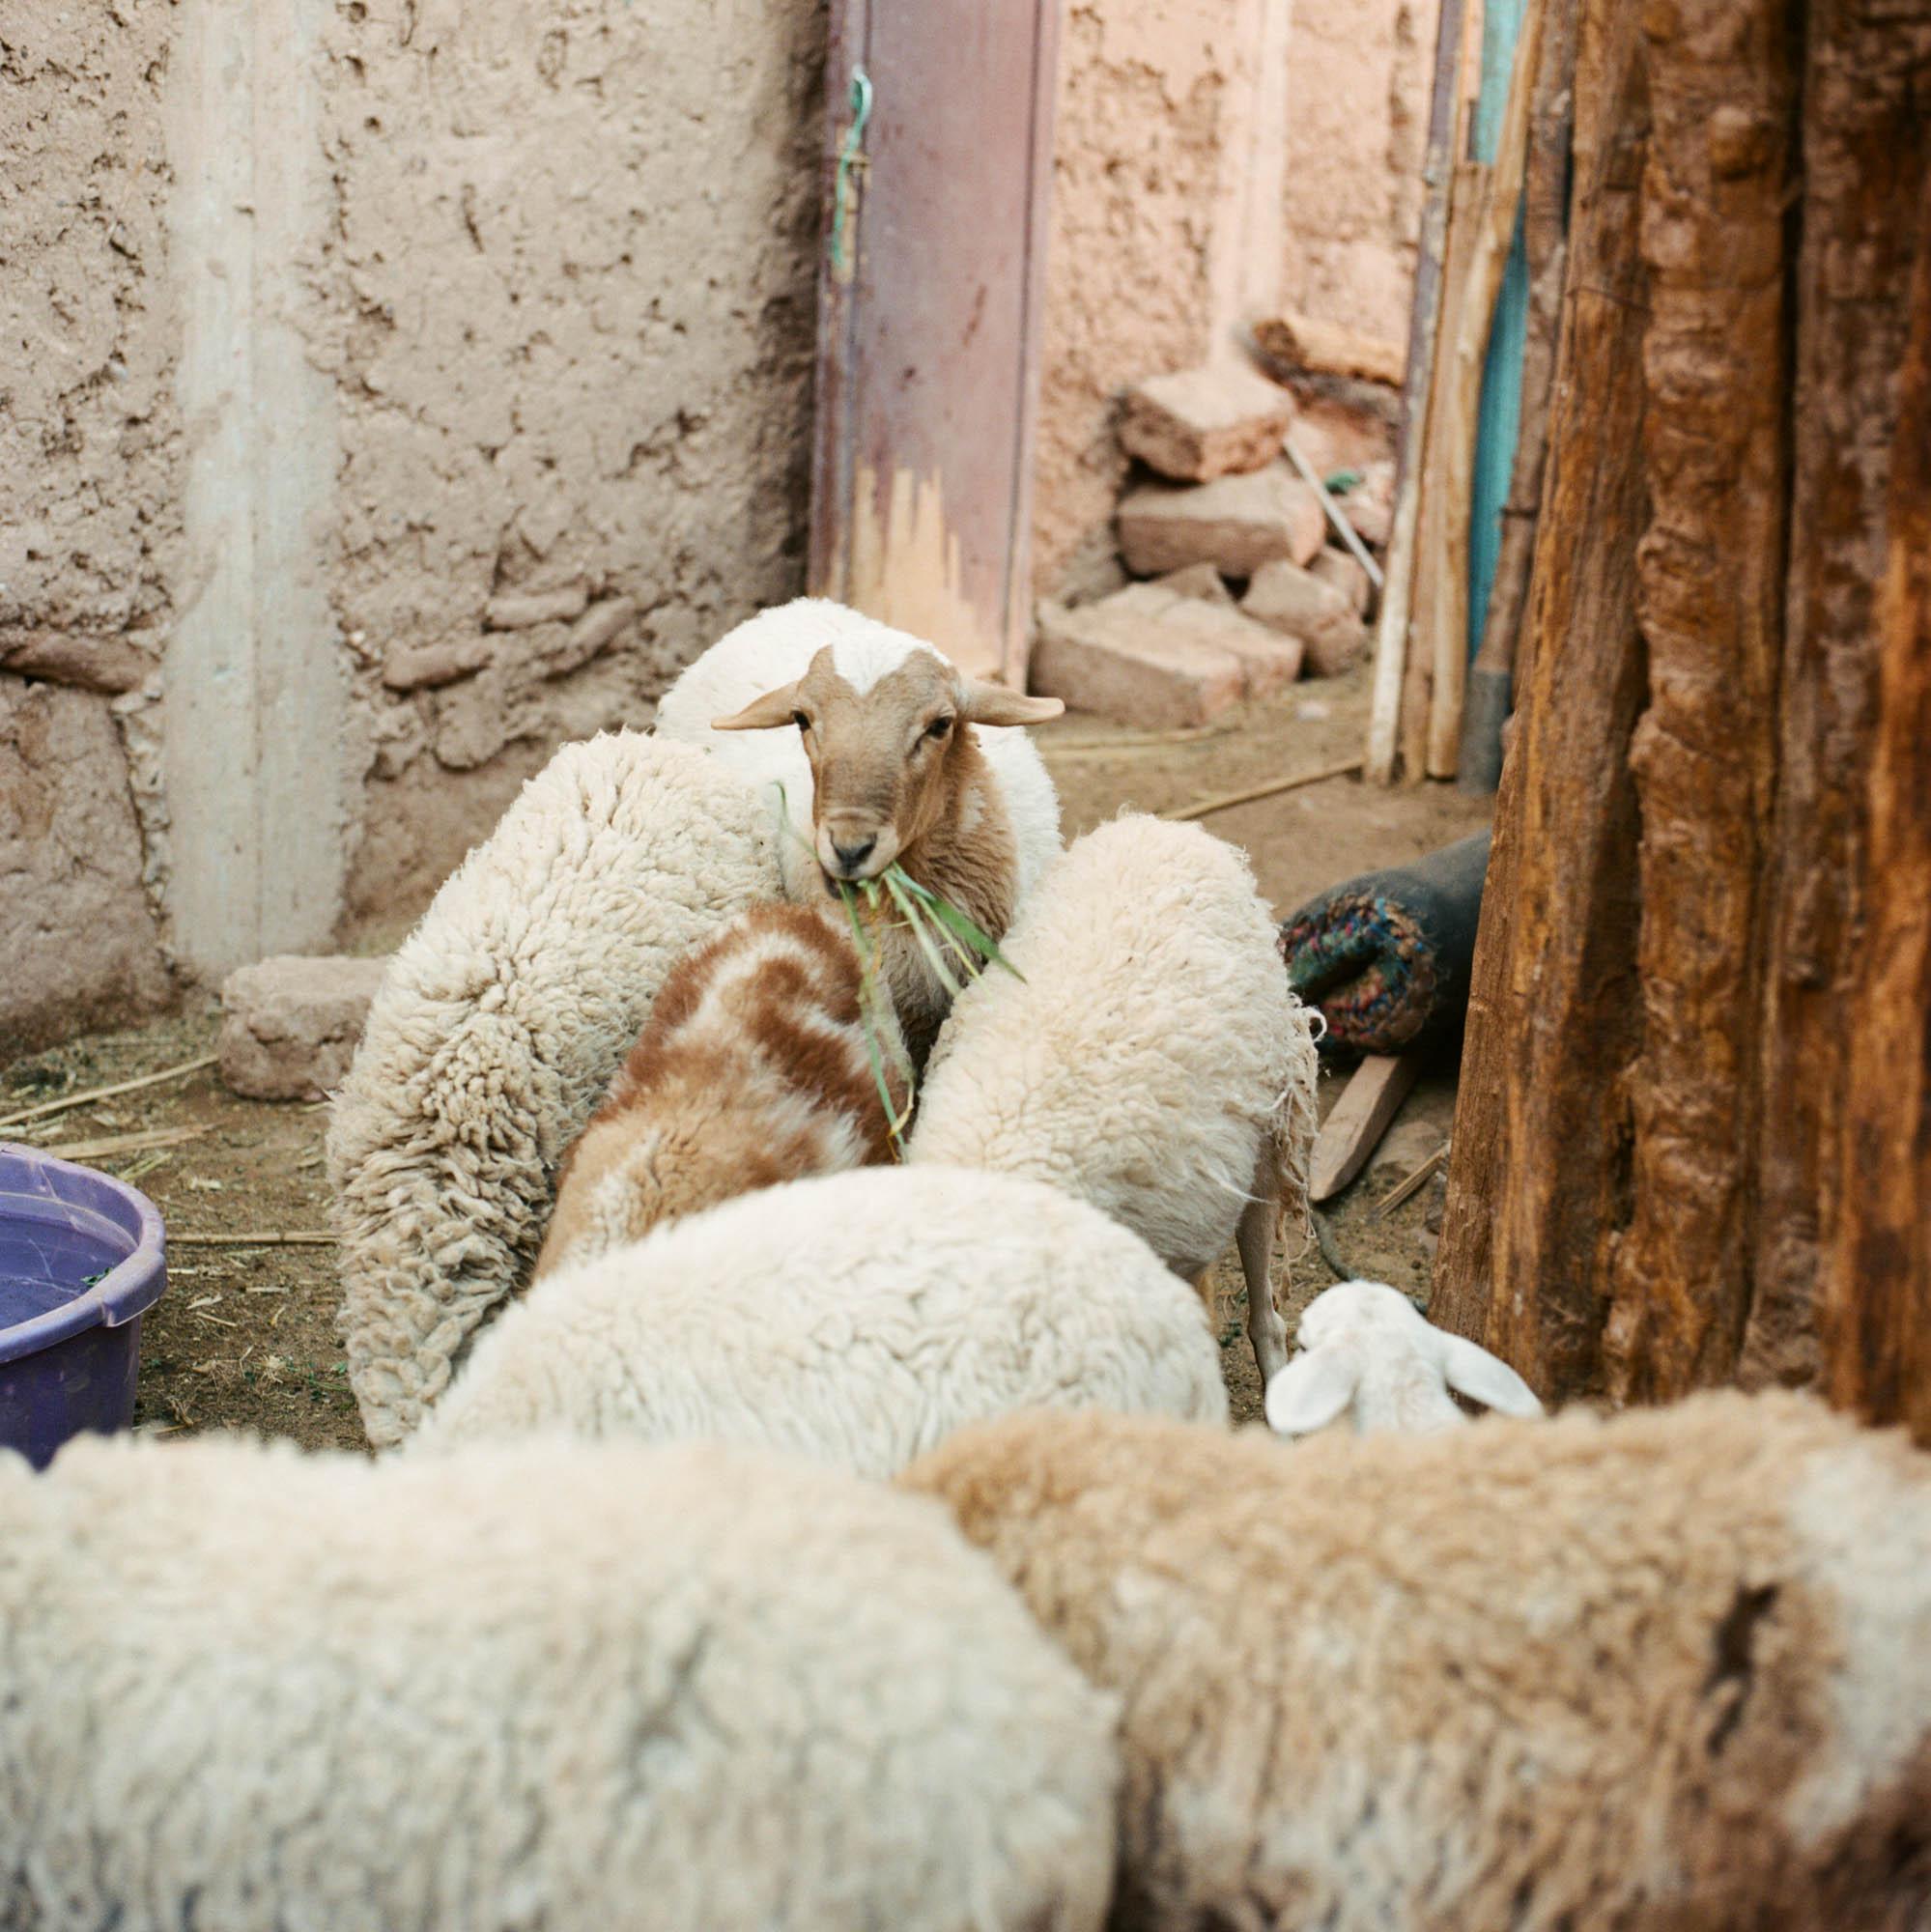 Before it's gone  - Sheep in the sheepfold of farmer Hamdani in the oasis of...